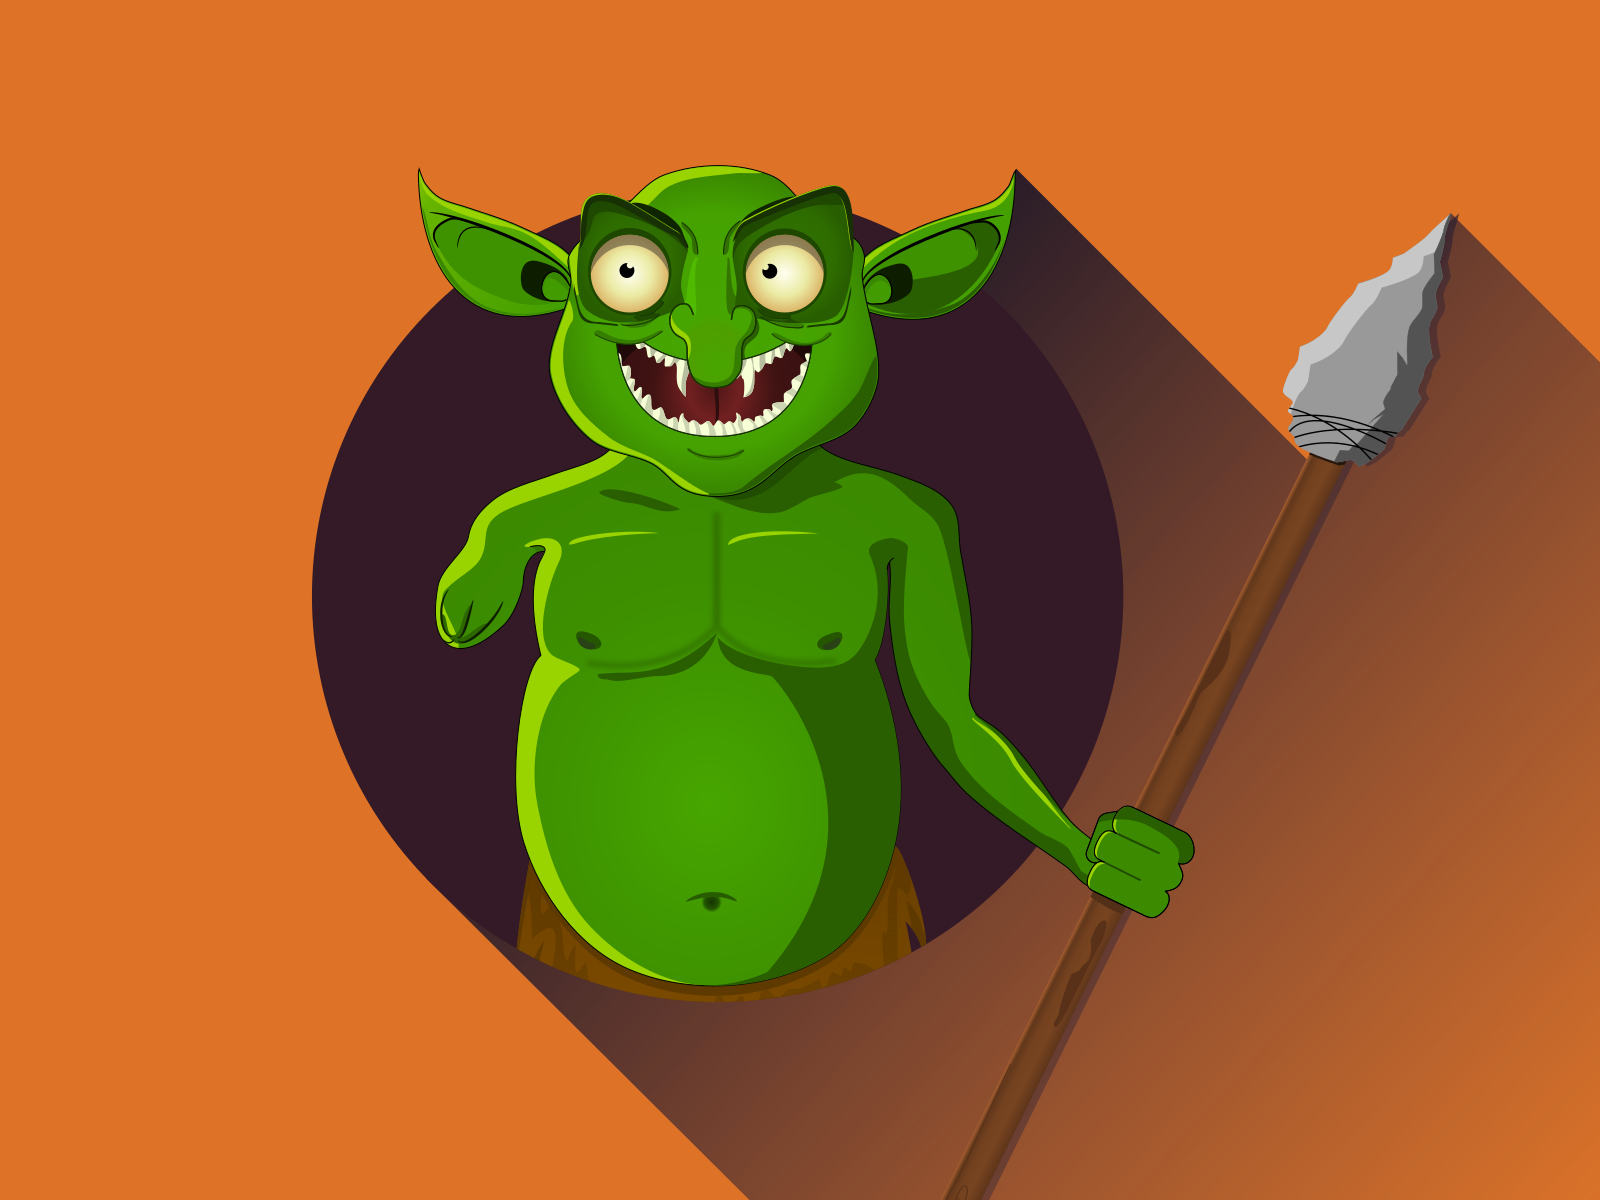 One aremed Goblin holding a spear